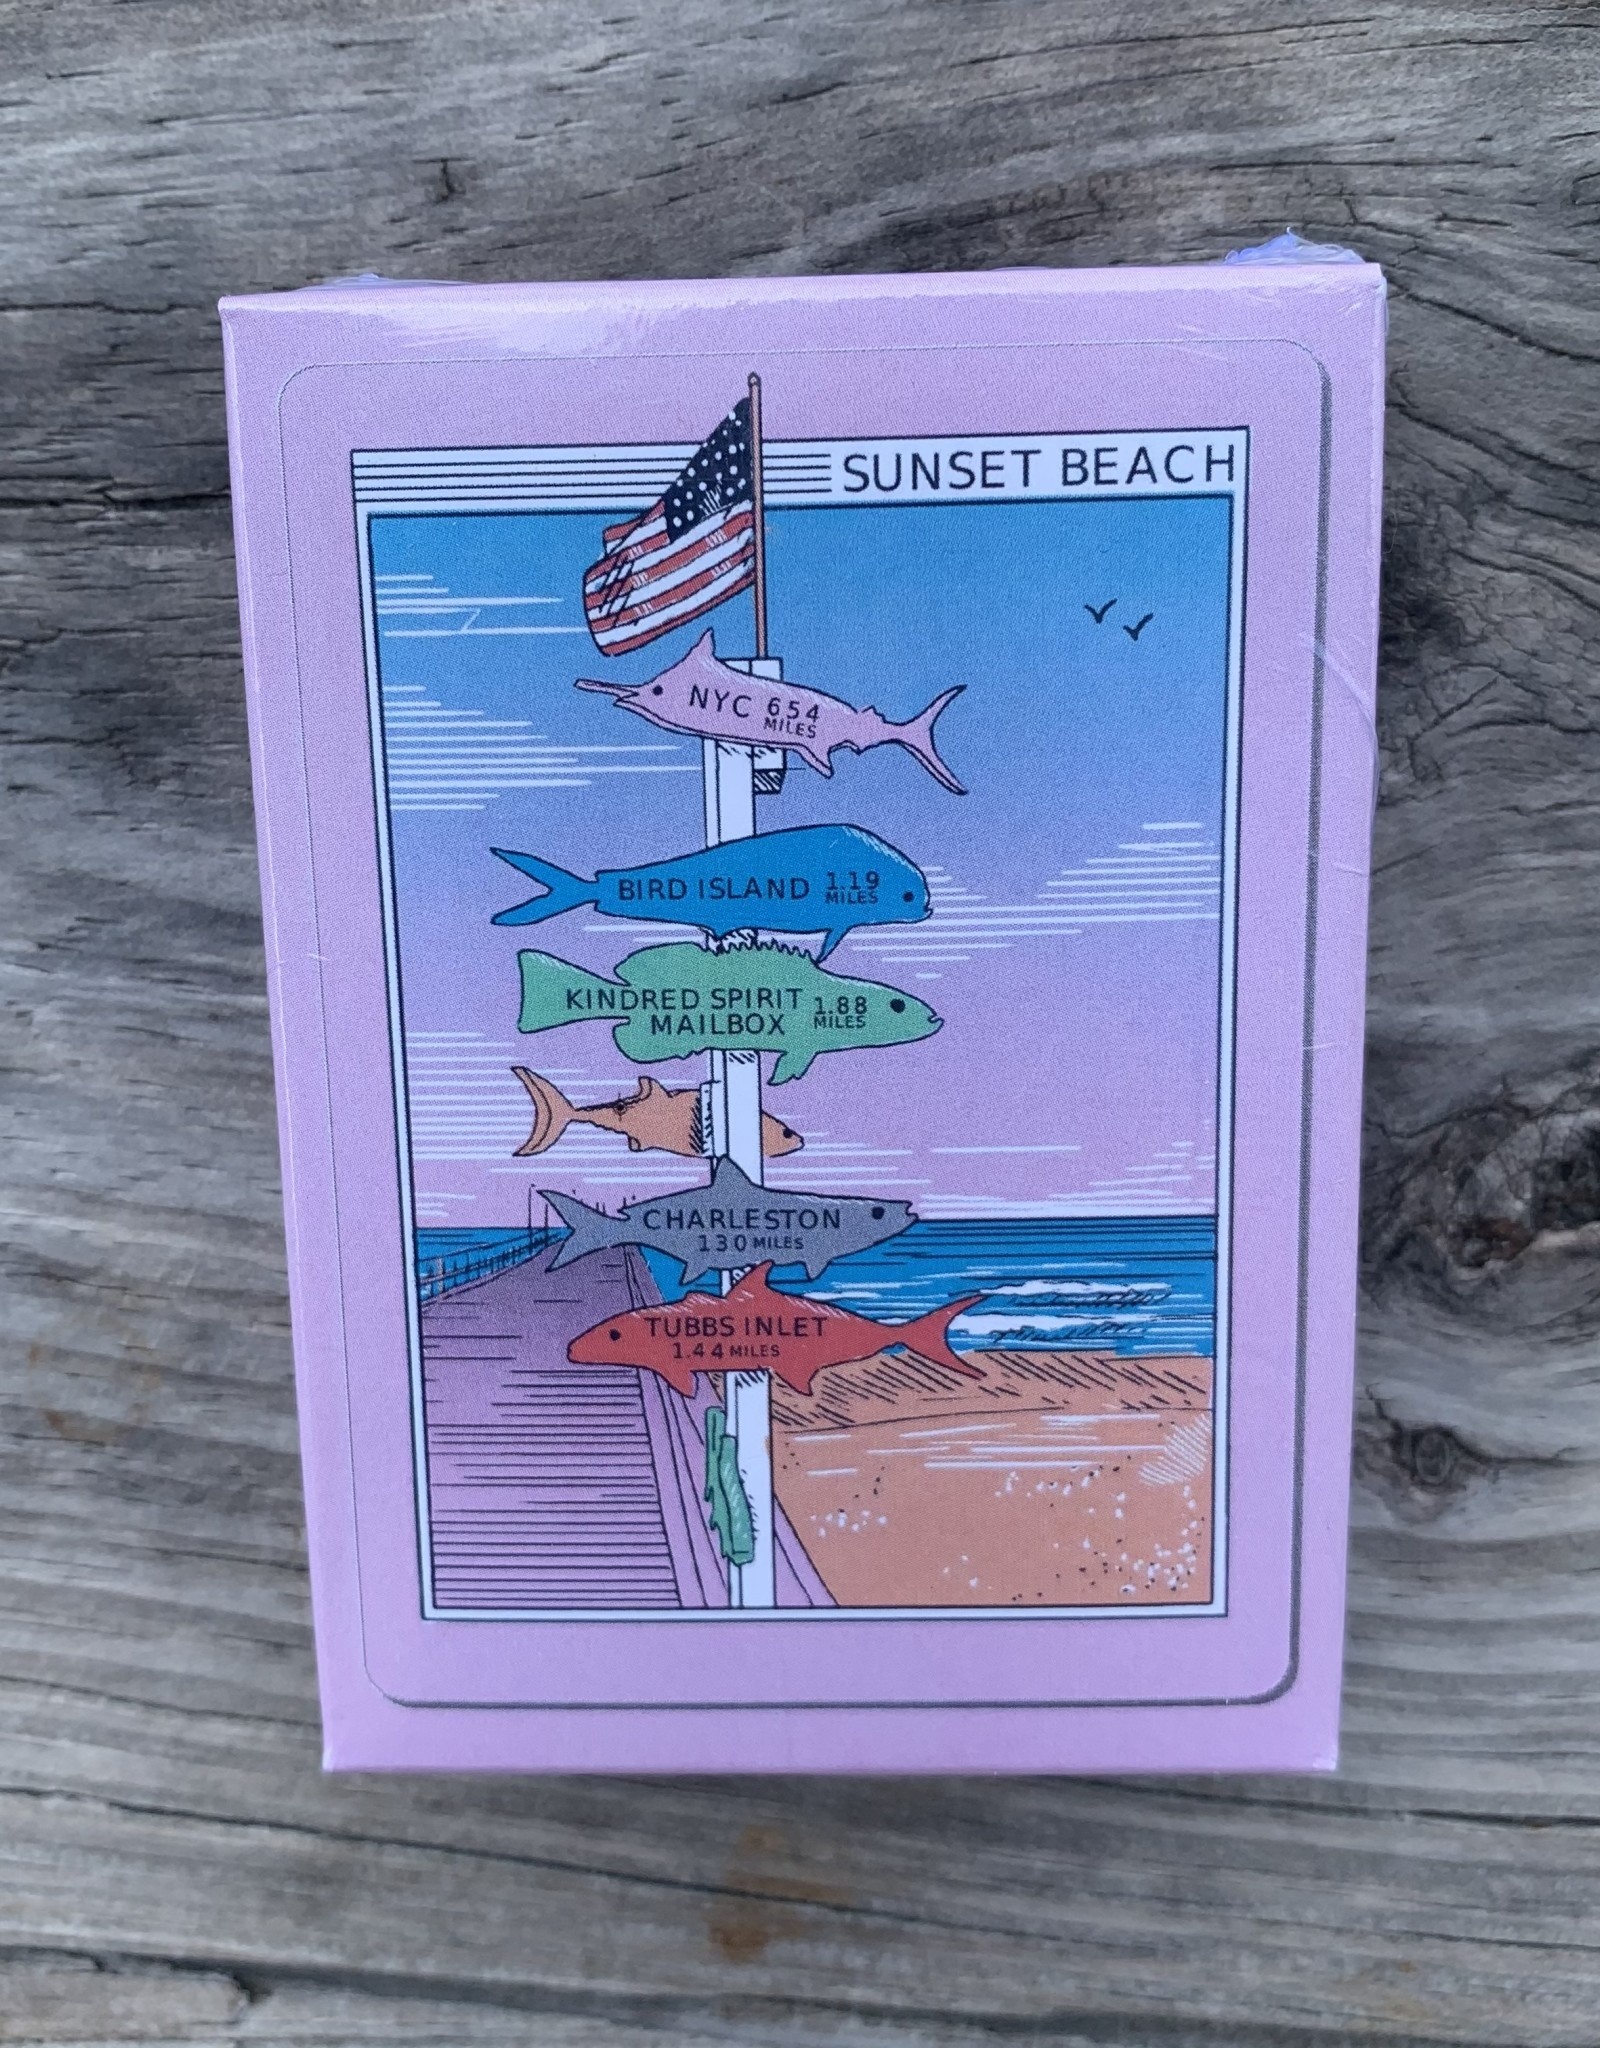 THE SUNSET BEACH PIER PLAYING CARDS DIRECTIONAL SIGN